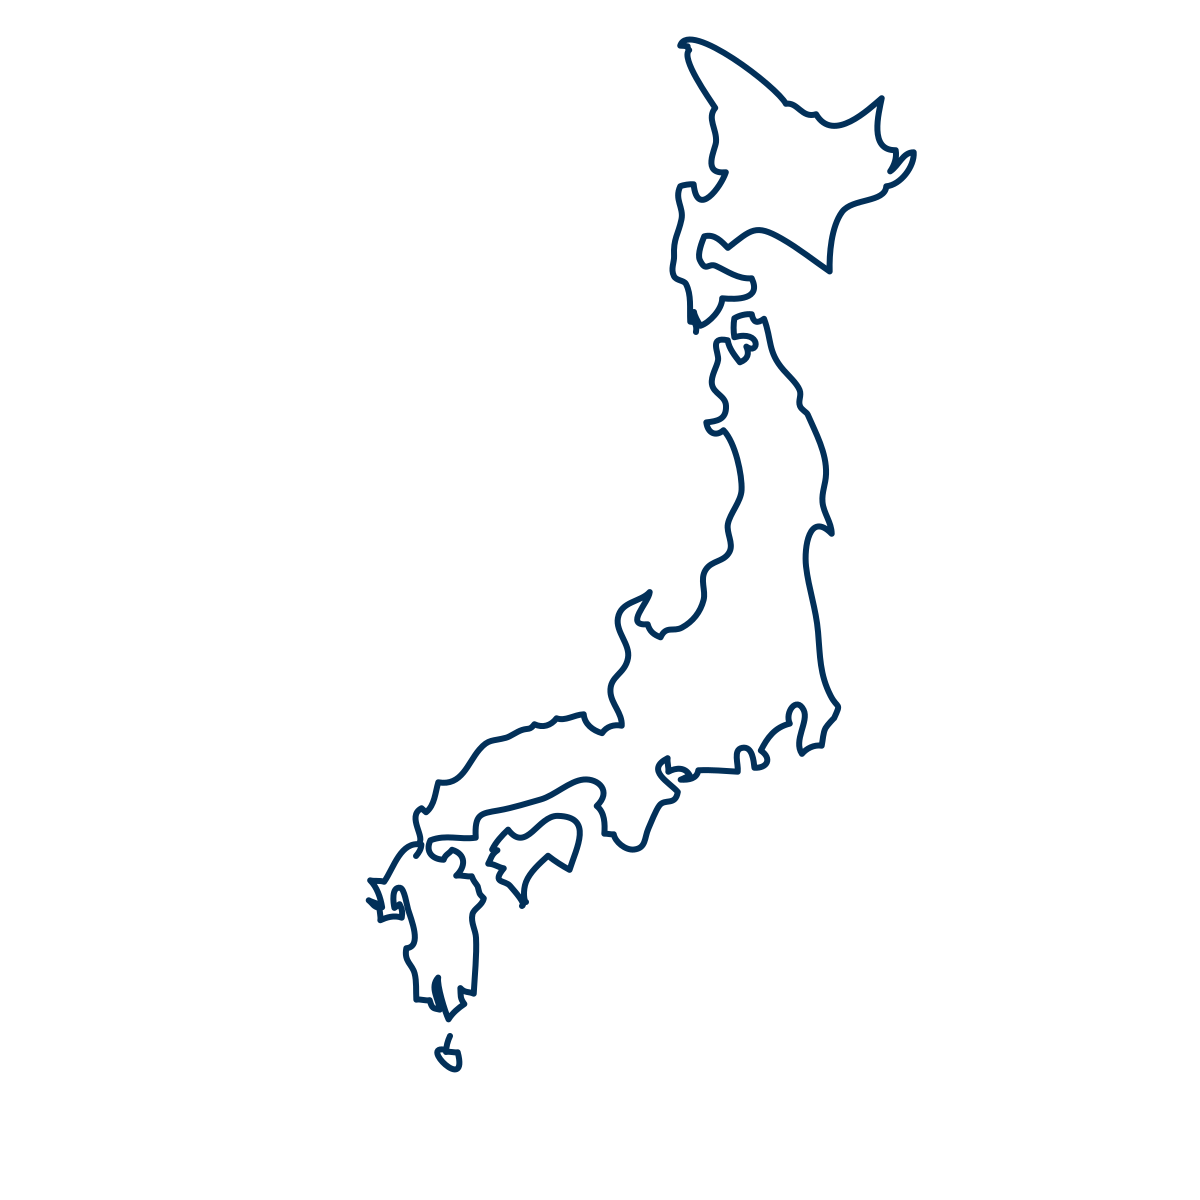 Map outline of Japan.